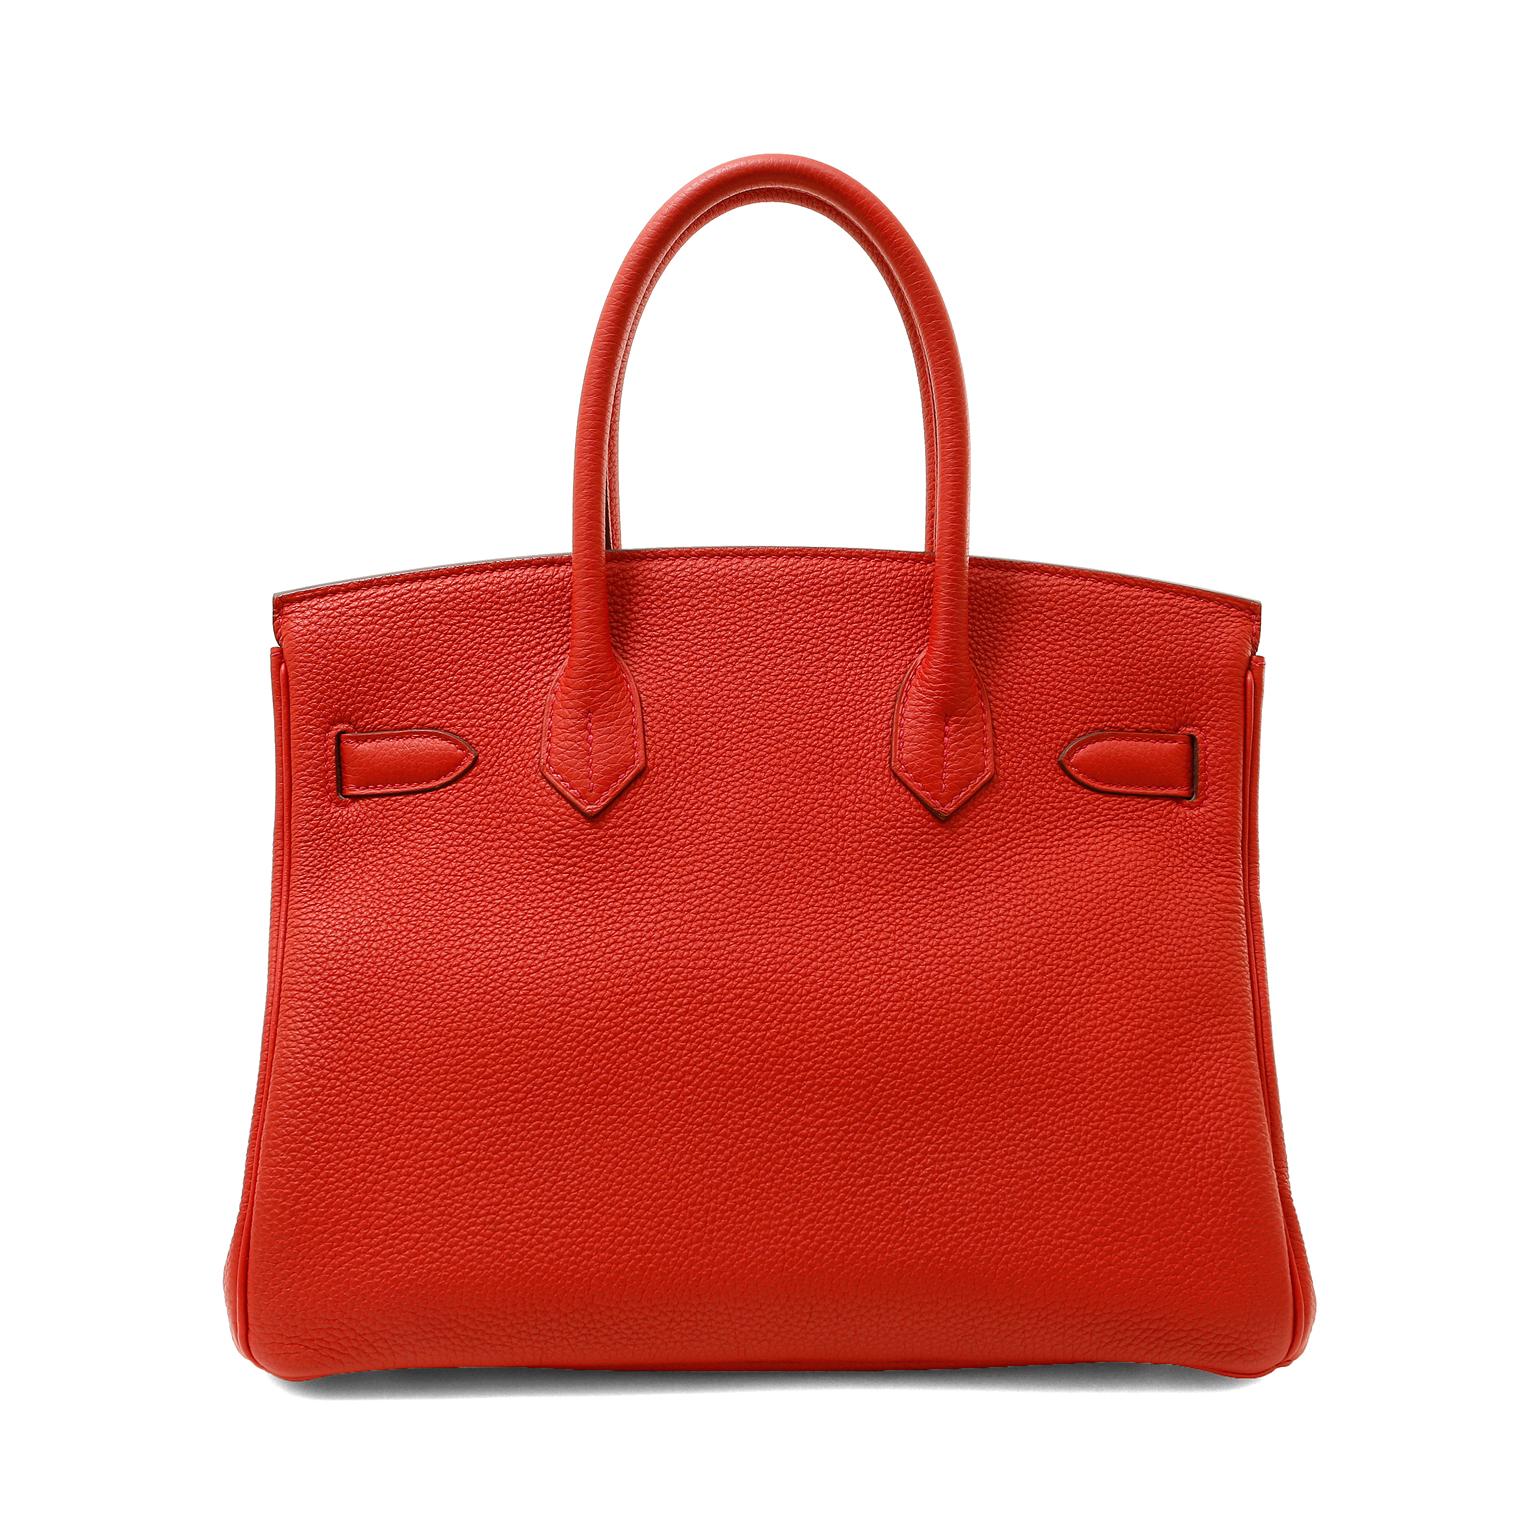 This authentic Hermès Cherry Red Togo 30 cm Birkin is in pristine unworn condition with the protective plastic intact on the hardware.  Stunningly paired with warm gold hardware, this brilliant red Birkin adds pop to any collection.
Cherry red Togo